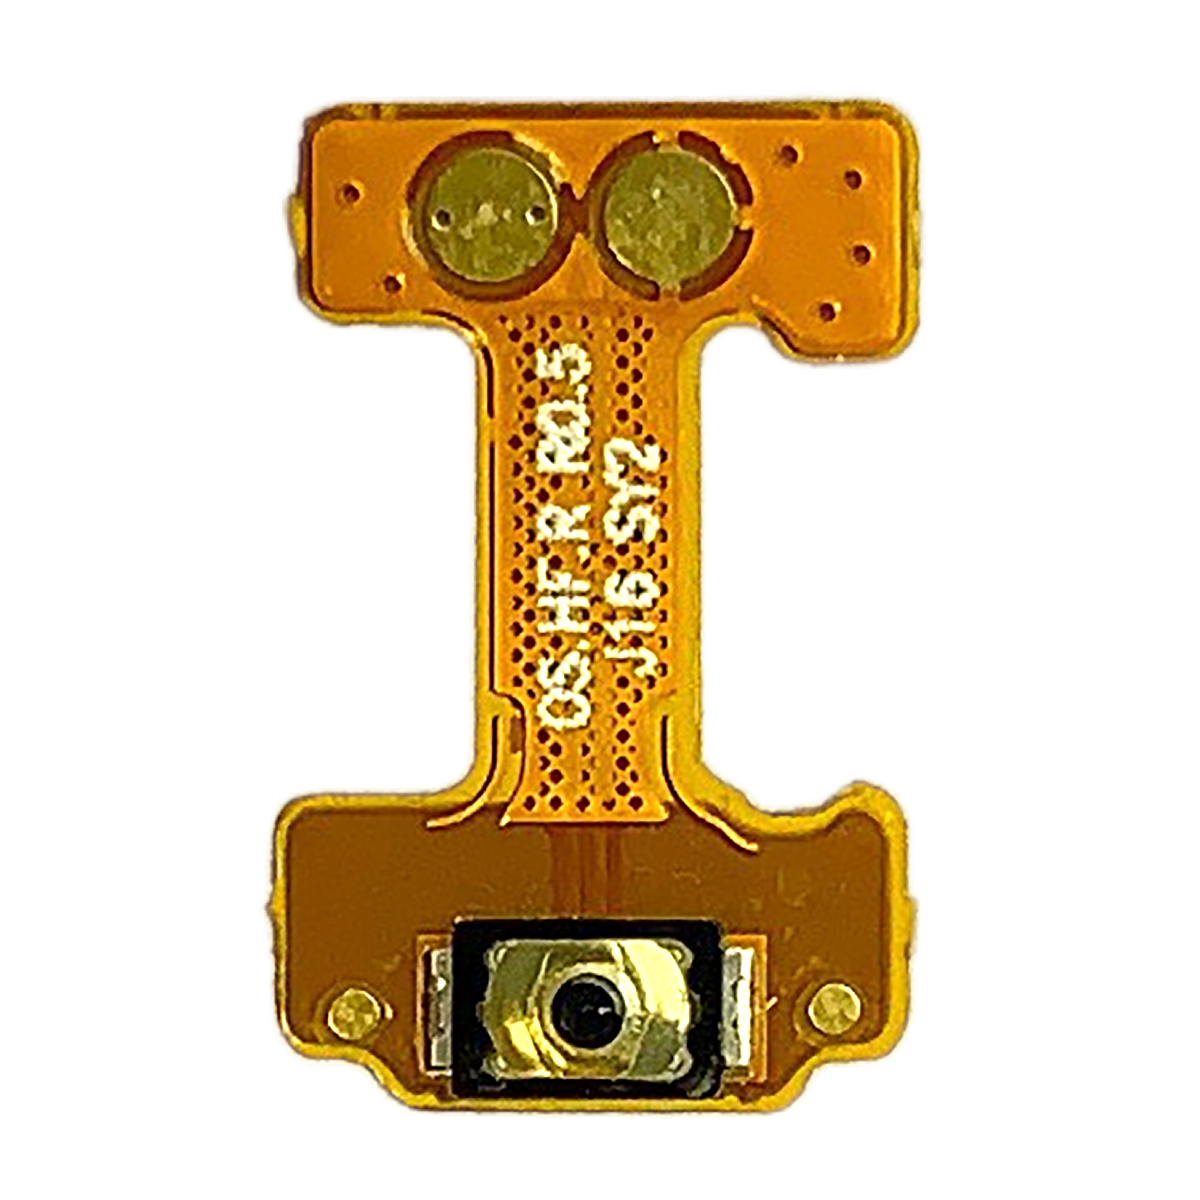 Galaxy A80 (A805/2019) Power Button Flex Cable Replacement